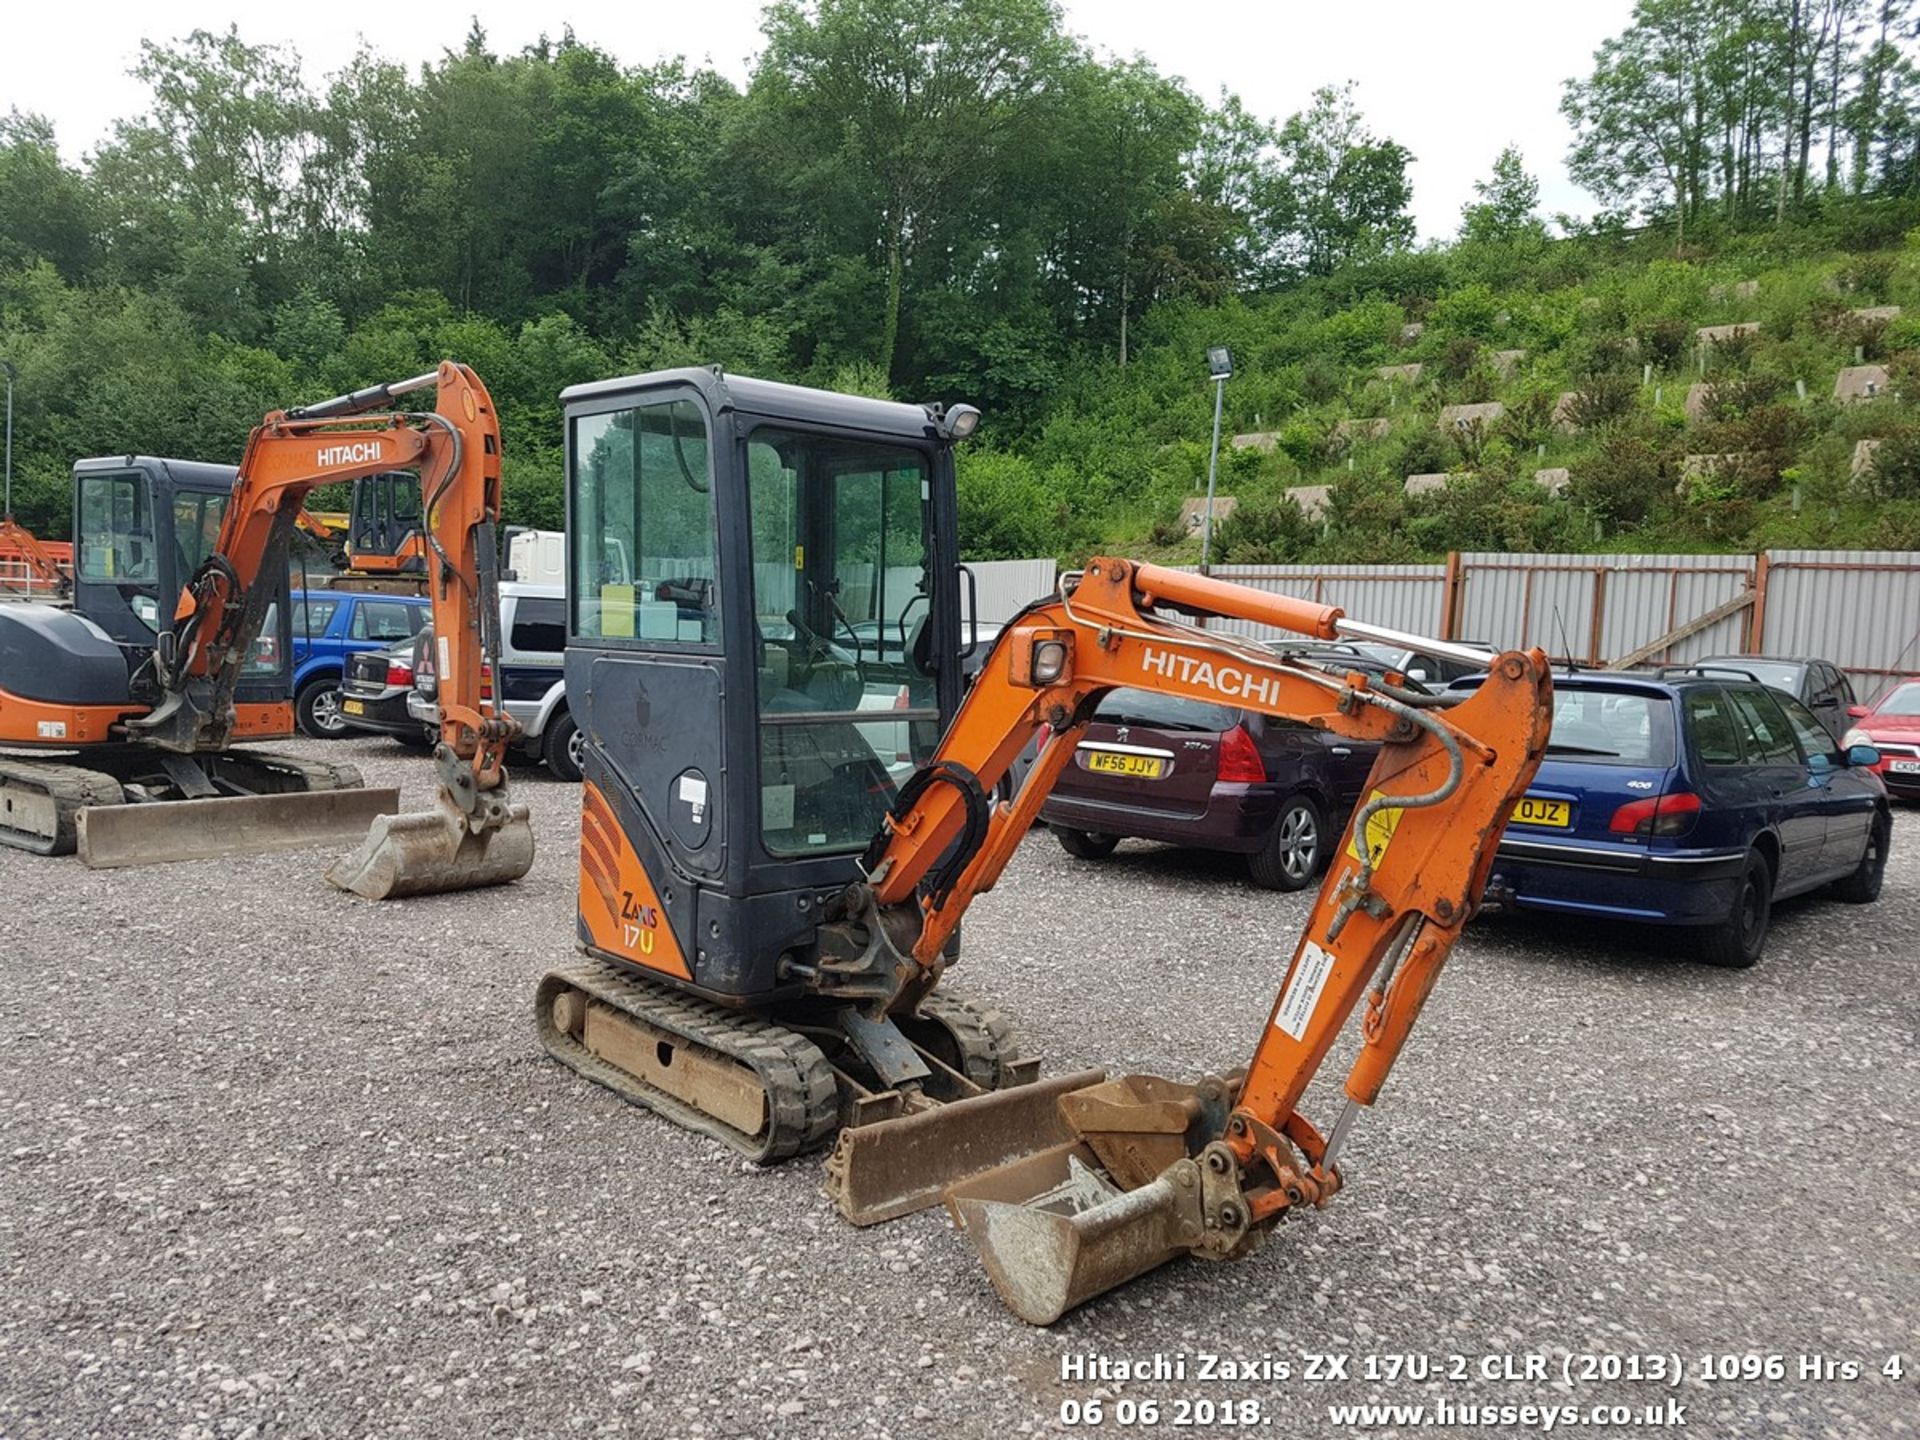 HITACHI ZAXIS 17U DIGGER 2013, 1096 RECORDED HOURS, C/W 2 BUCKETS, PIPED 719013 - Image 5 of 7